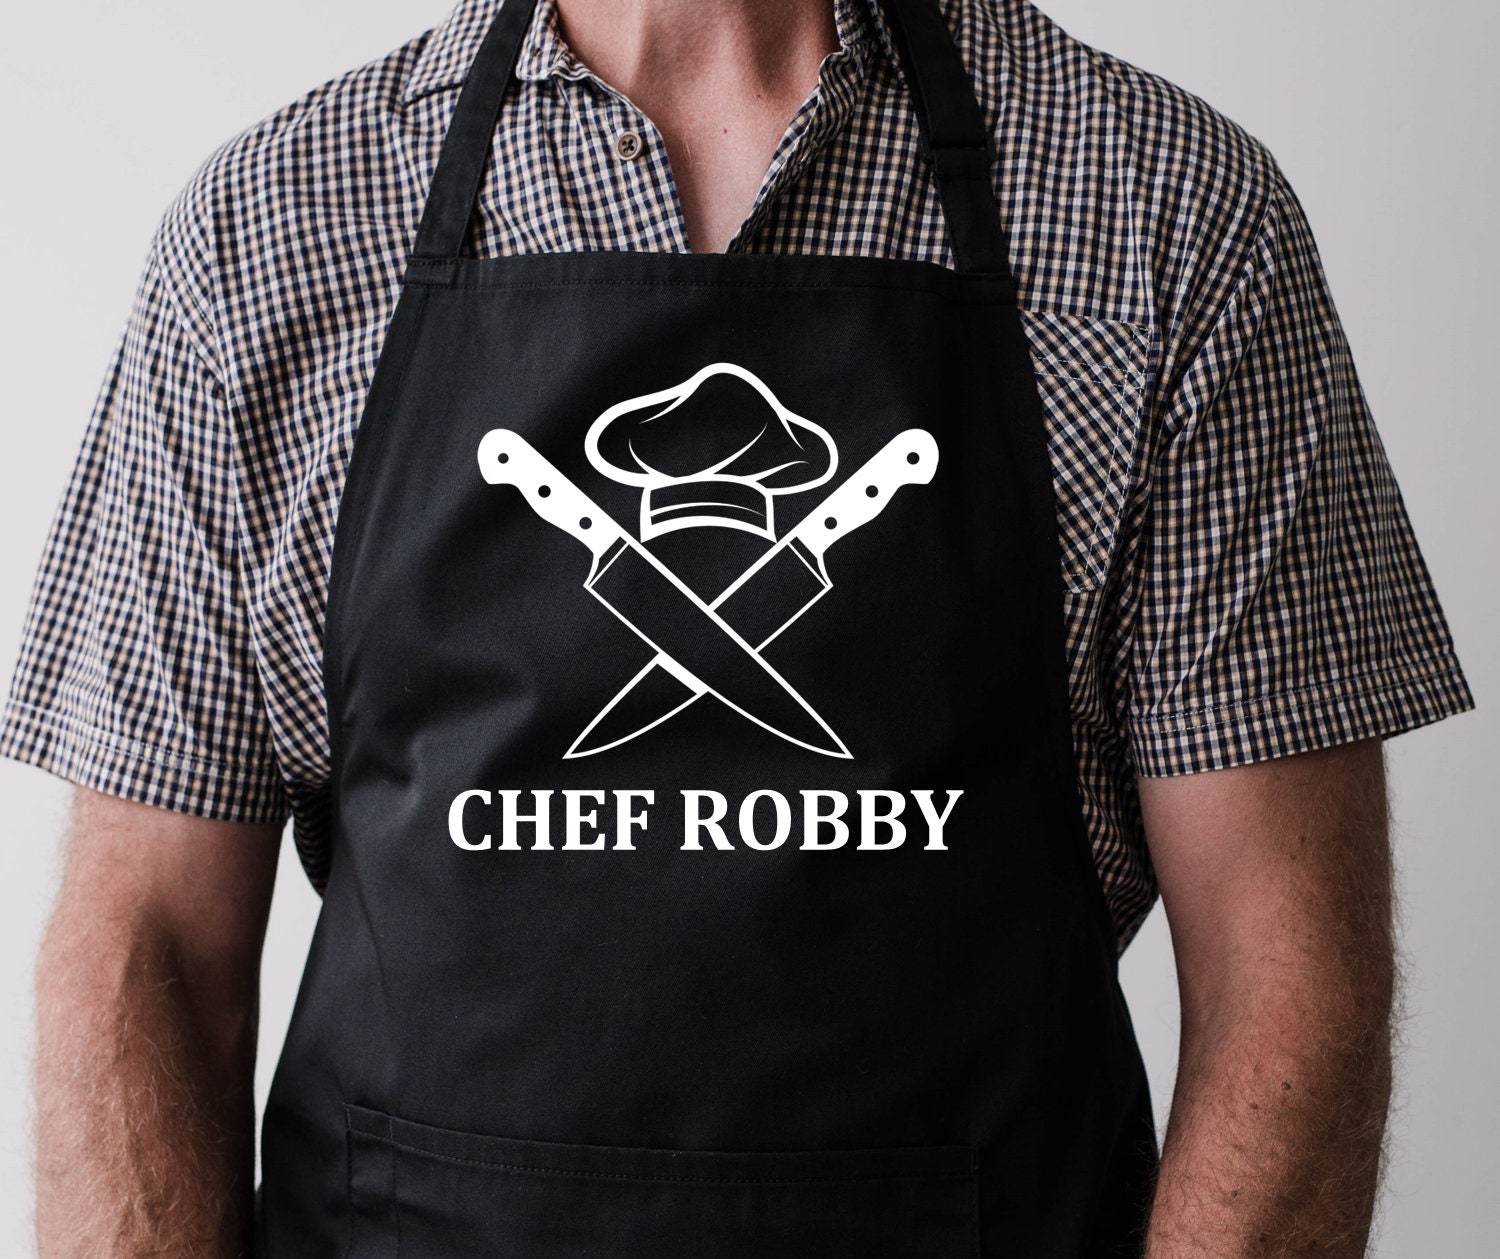 Mothers Day Personalised Apron with Pockets Any Name of your choice Baking Apron Ideal Gift Perfect Fathers Day Gift Chefs Apron